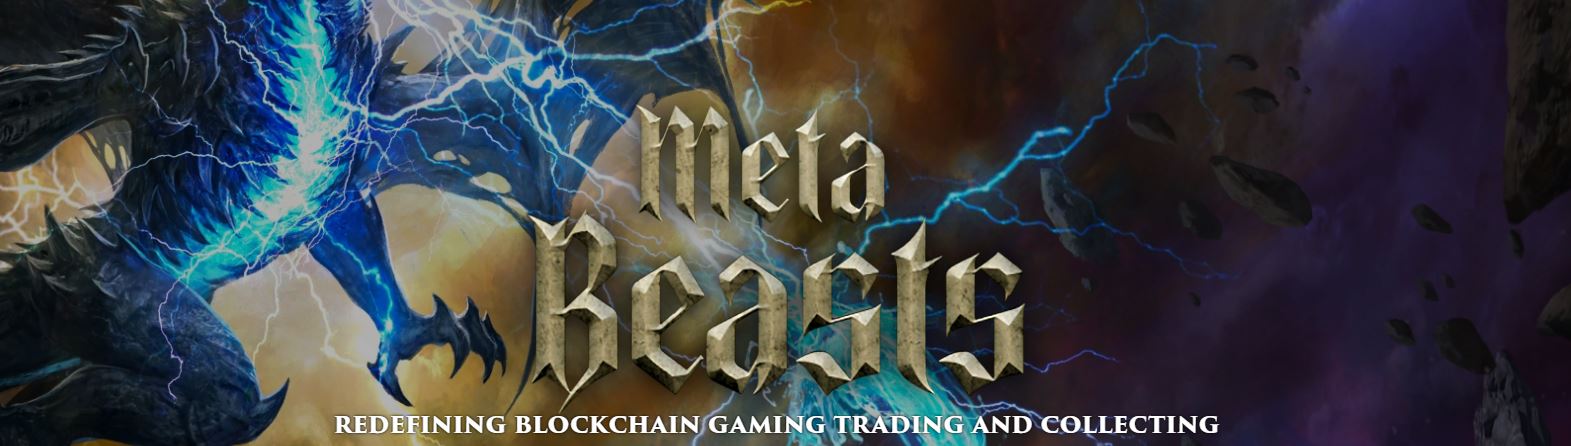 MetaBeasts Free Mint on August 22nd